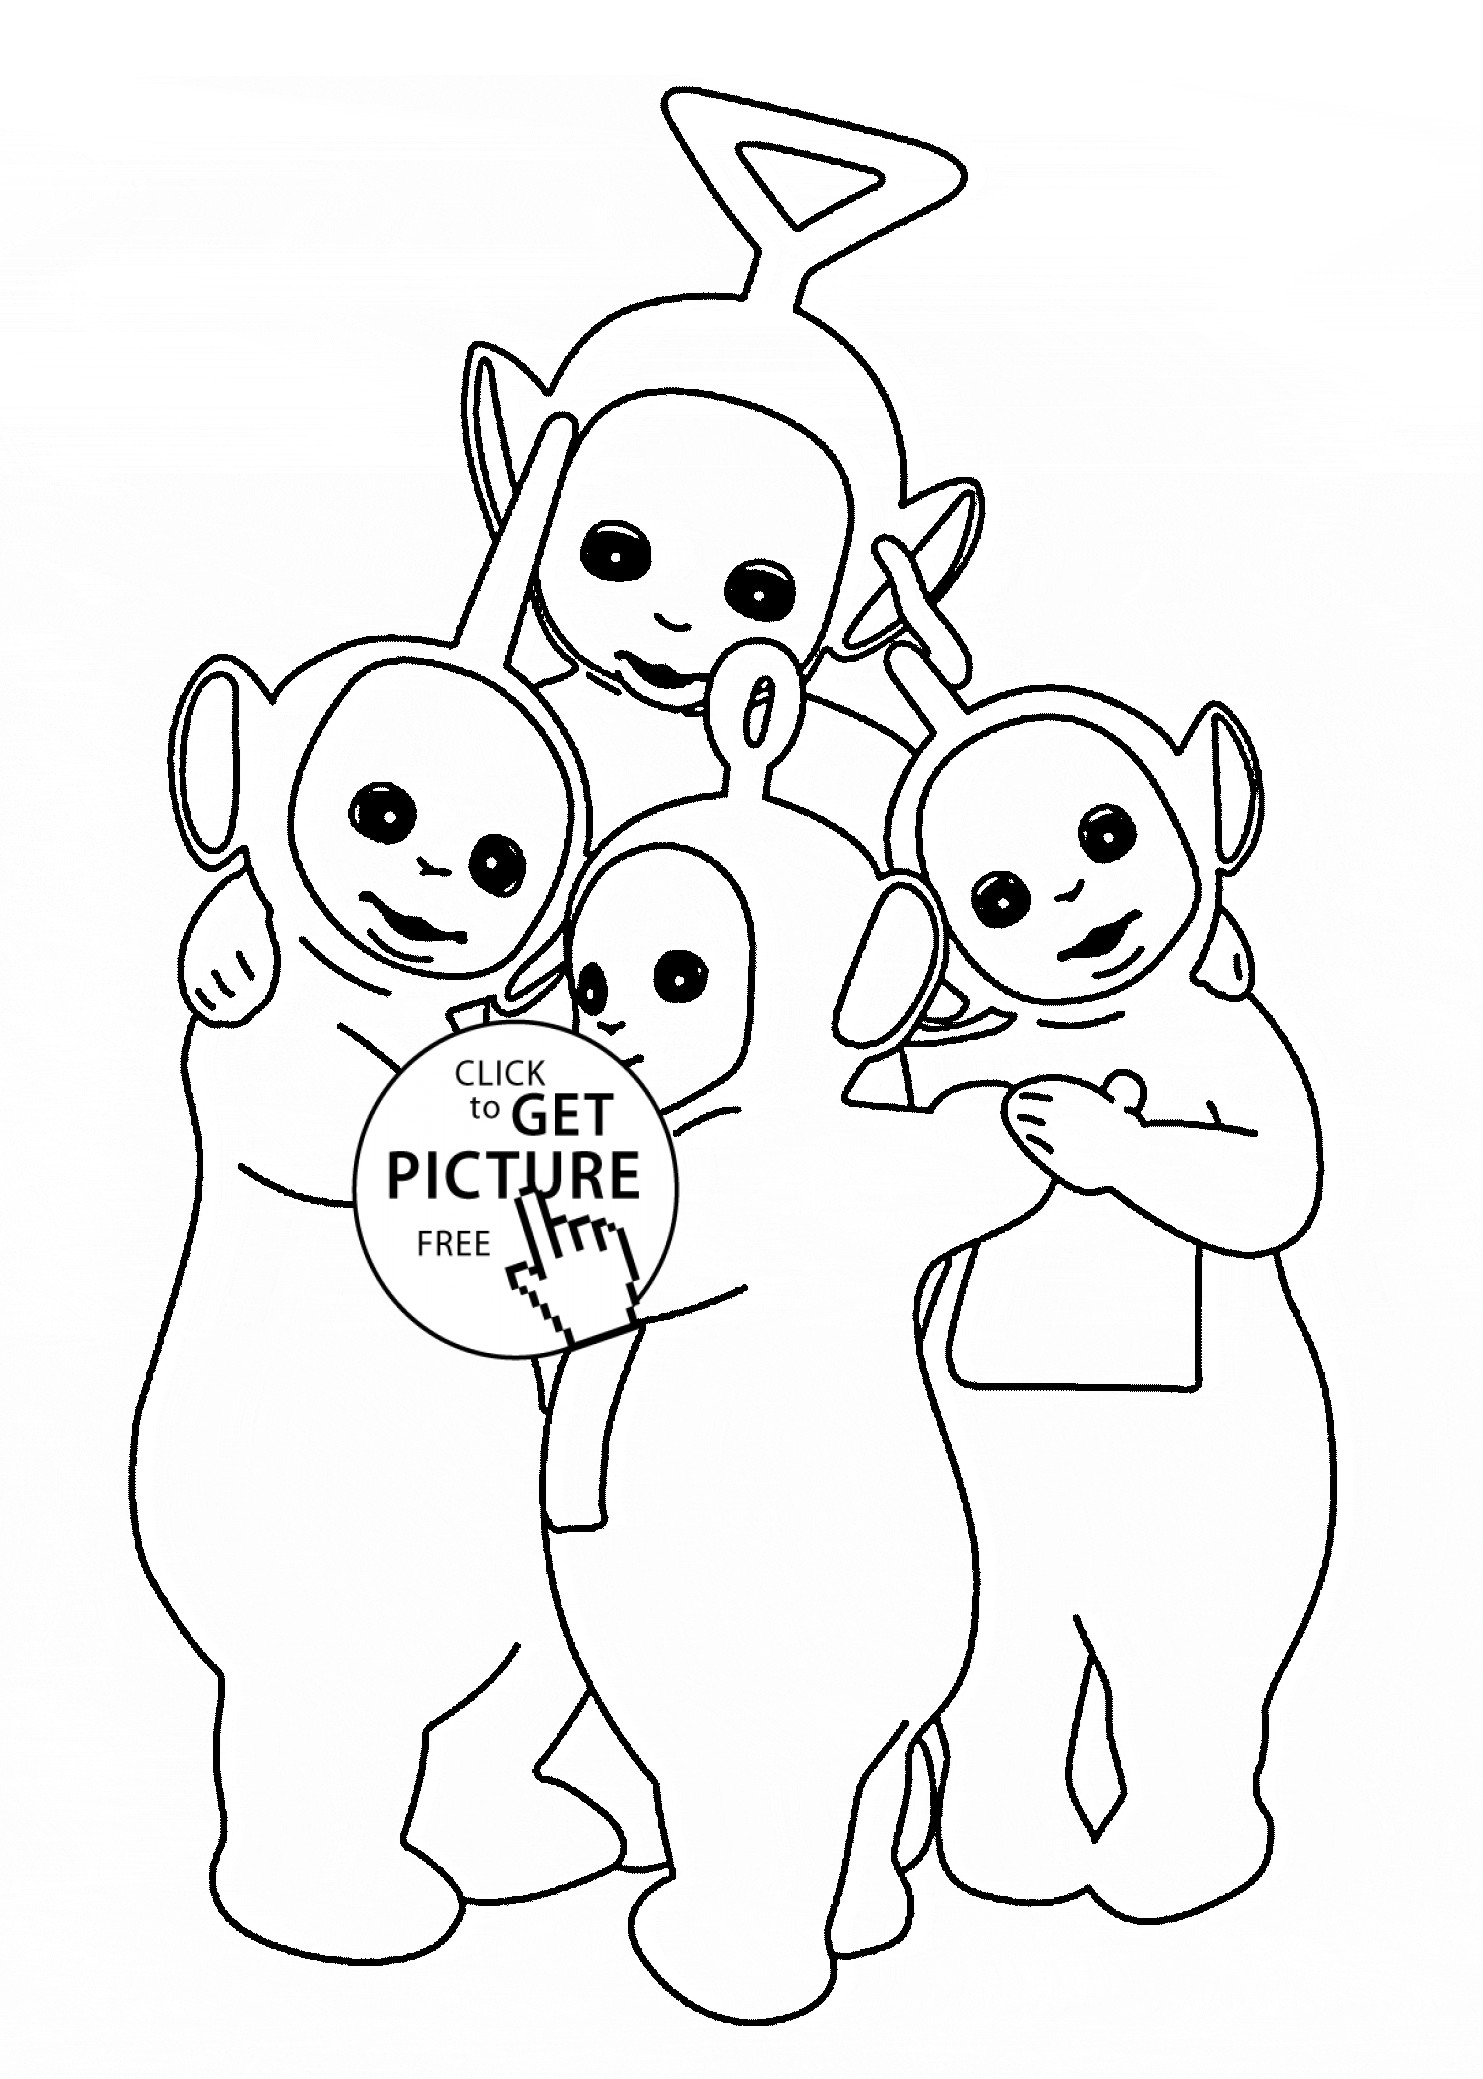 Free Coloring Sheets For Toddlers
 Teletubbies to her coloring pages for kids printable free